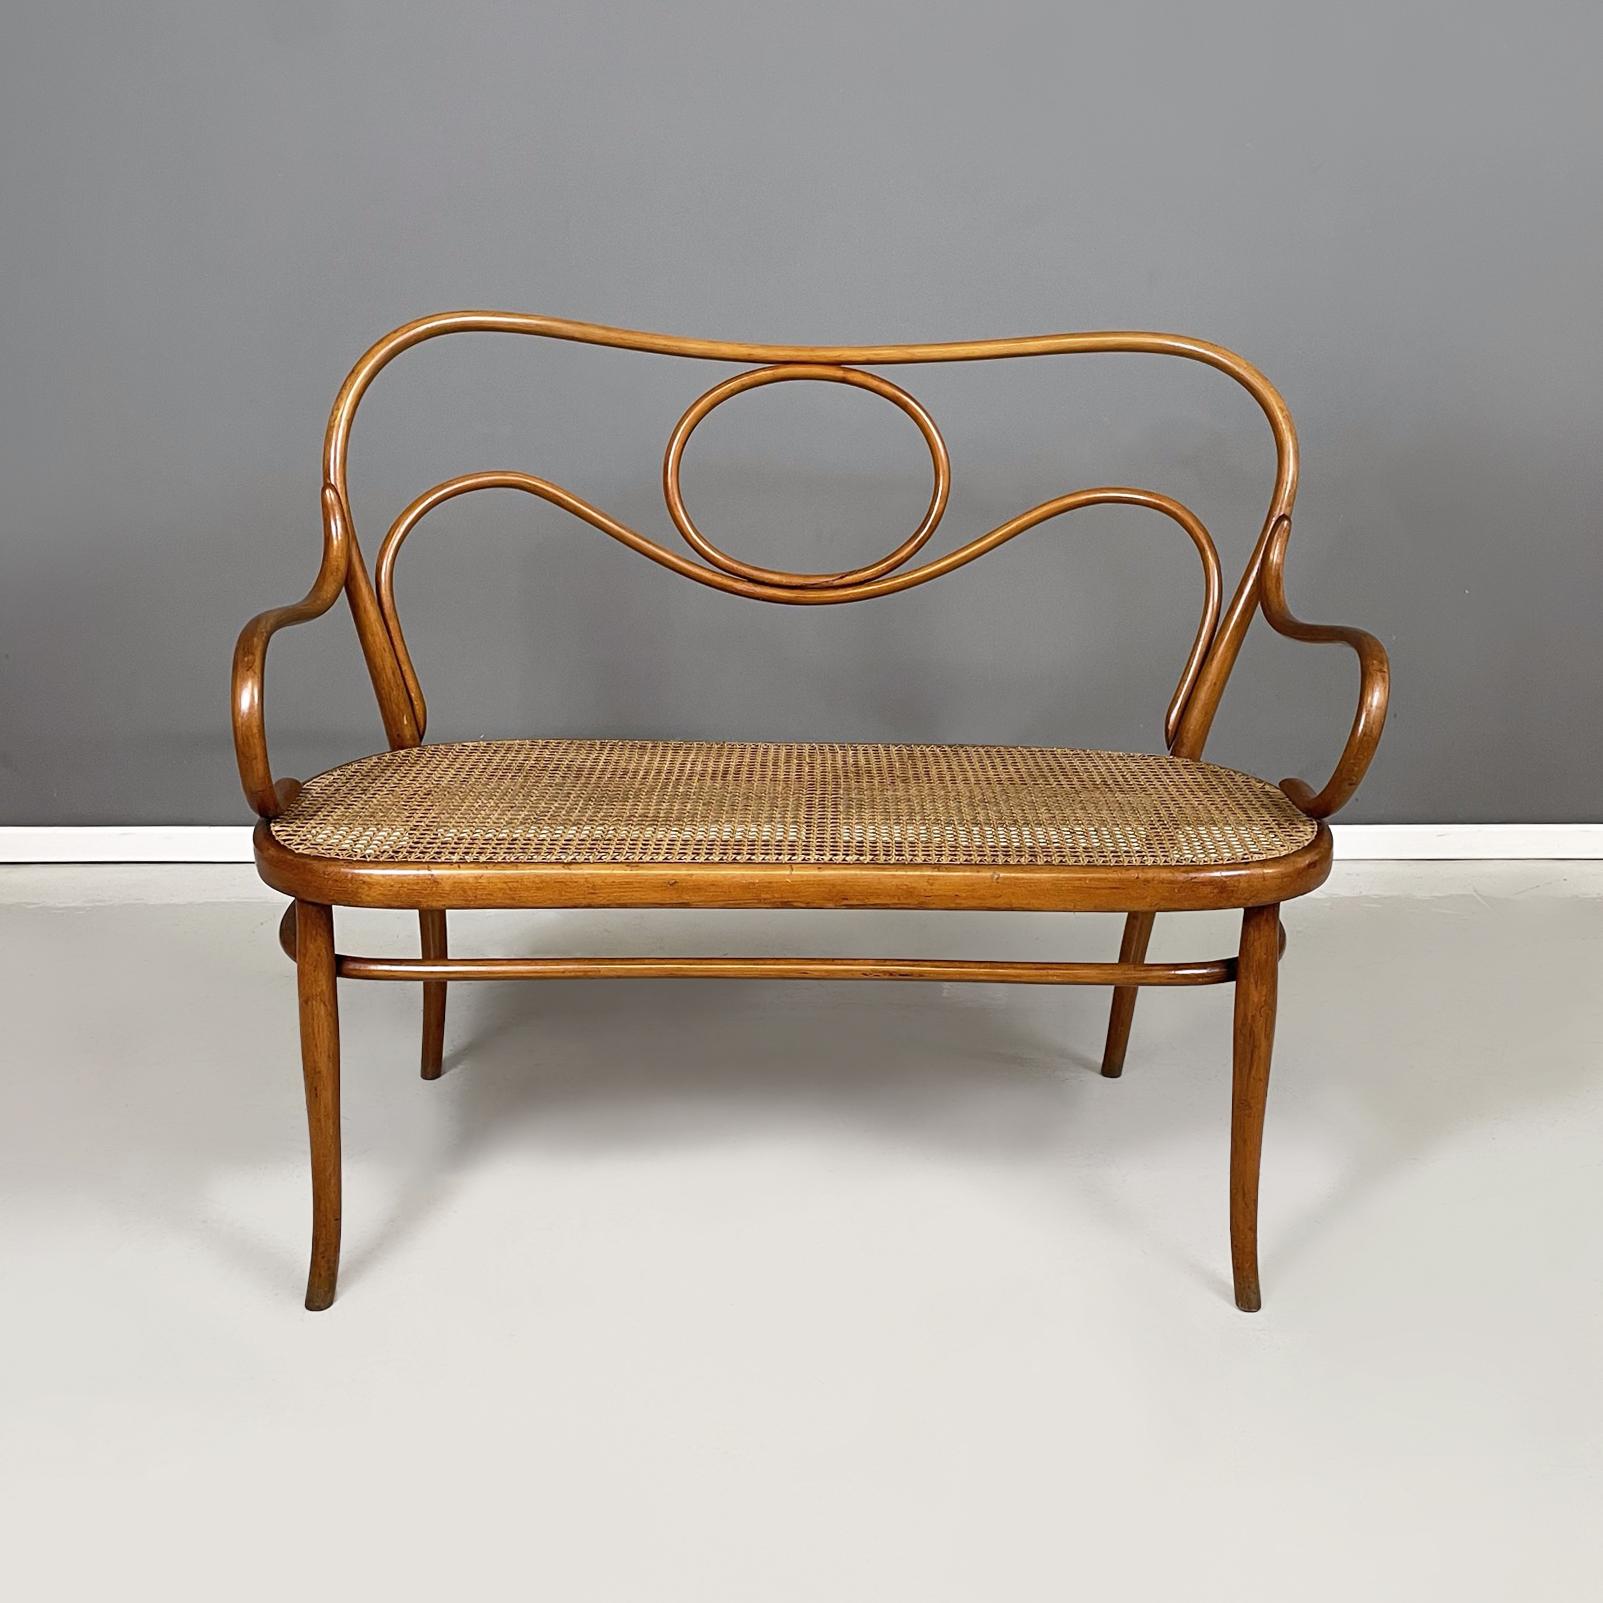 Austrian antique Wooden and Vienna straw two-seater bench by Thonet, early 1900s
Two-seater bench with handmade Vienna straw seat. The backrest, the armrests and the legs are in curved wood with a round section.
Produced by Thonet at the beginning